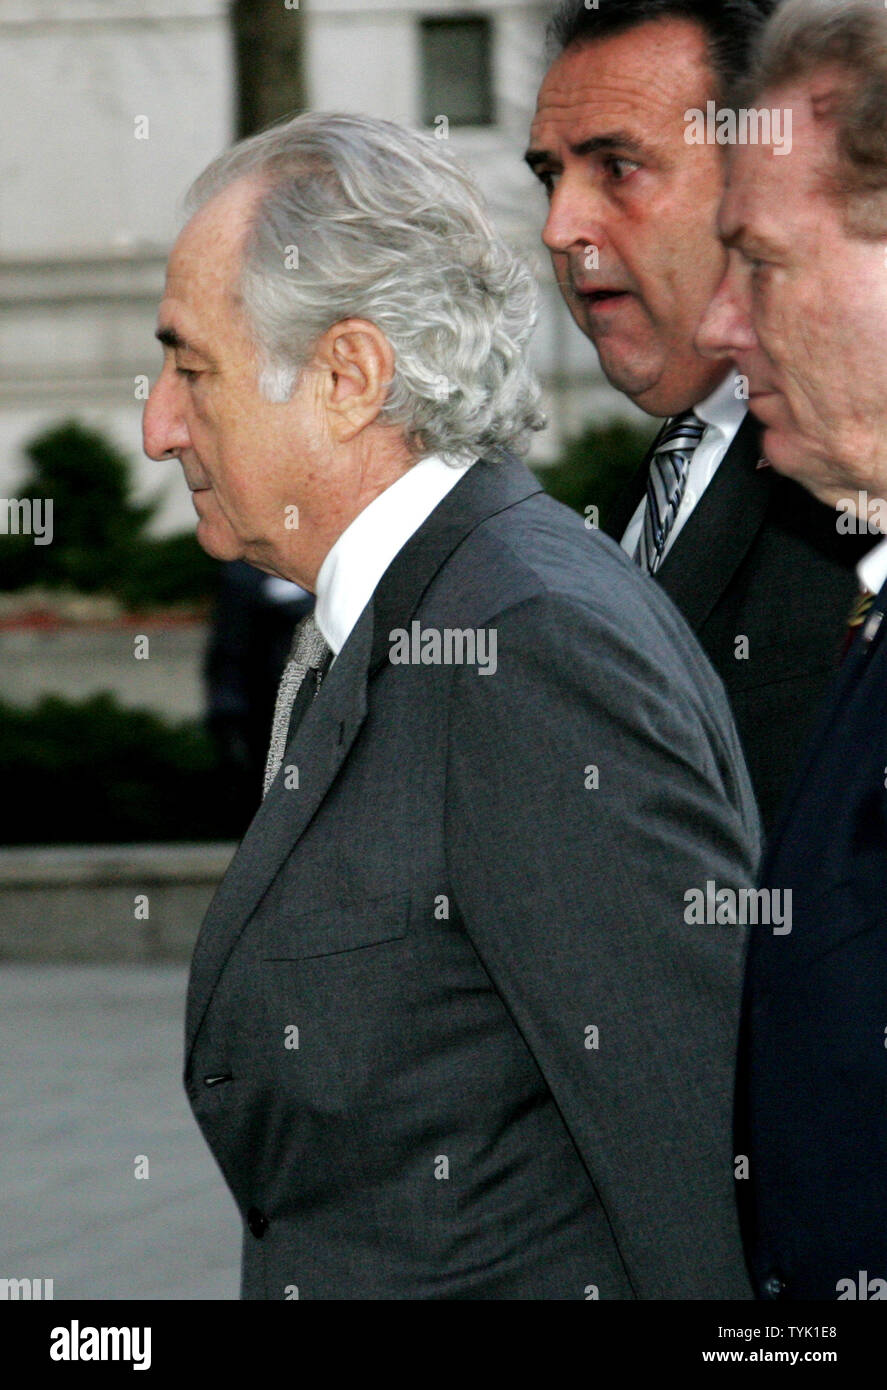 Bernard Madoff arrives at Federal Court where he is expected to plead guilty to securities fraud charges on March 12, 2009 in New York. Victims will also be in court to testify against the disgraced financier who is accused of masterminding a $50 billion Ponzi scheme. (UPI Photo/Monika Graff) Stock Photo